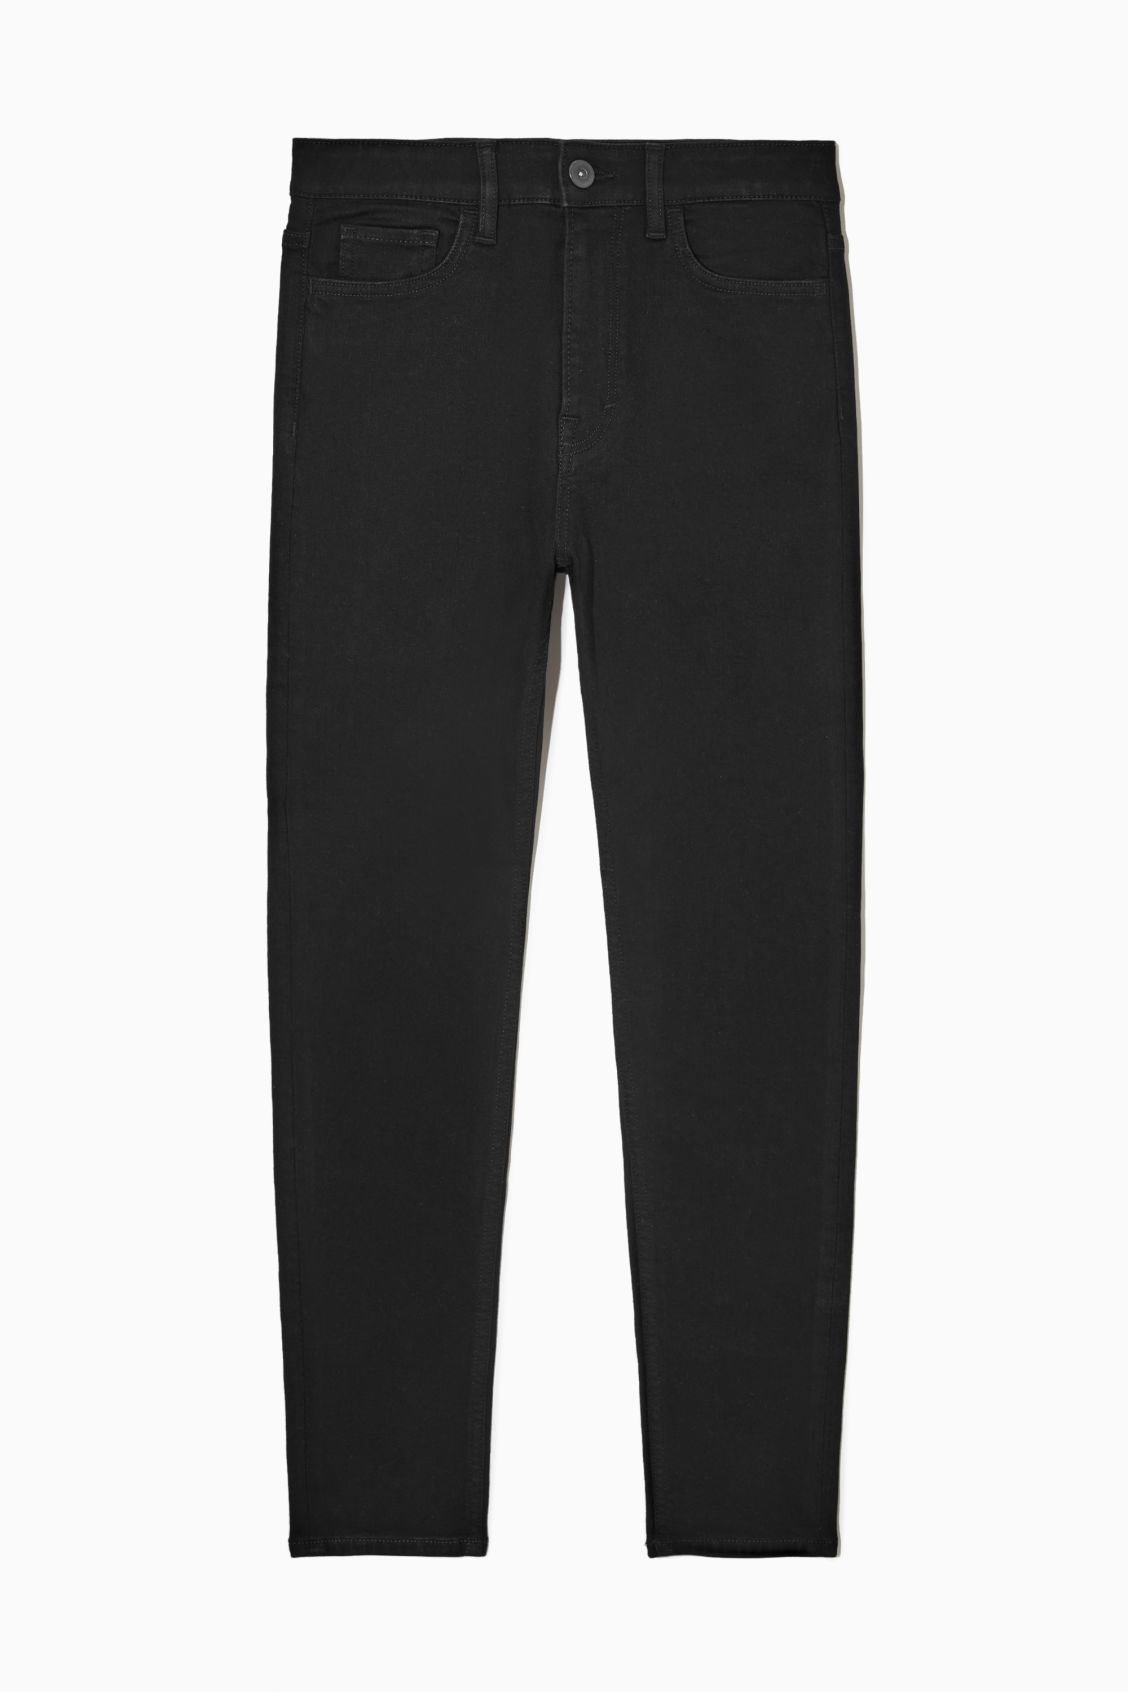 SKINNY ANKLE-LENGTH JEANS | COS UK